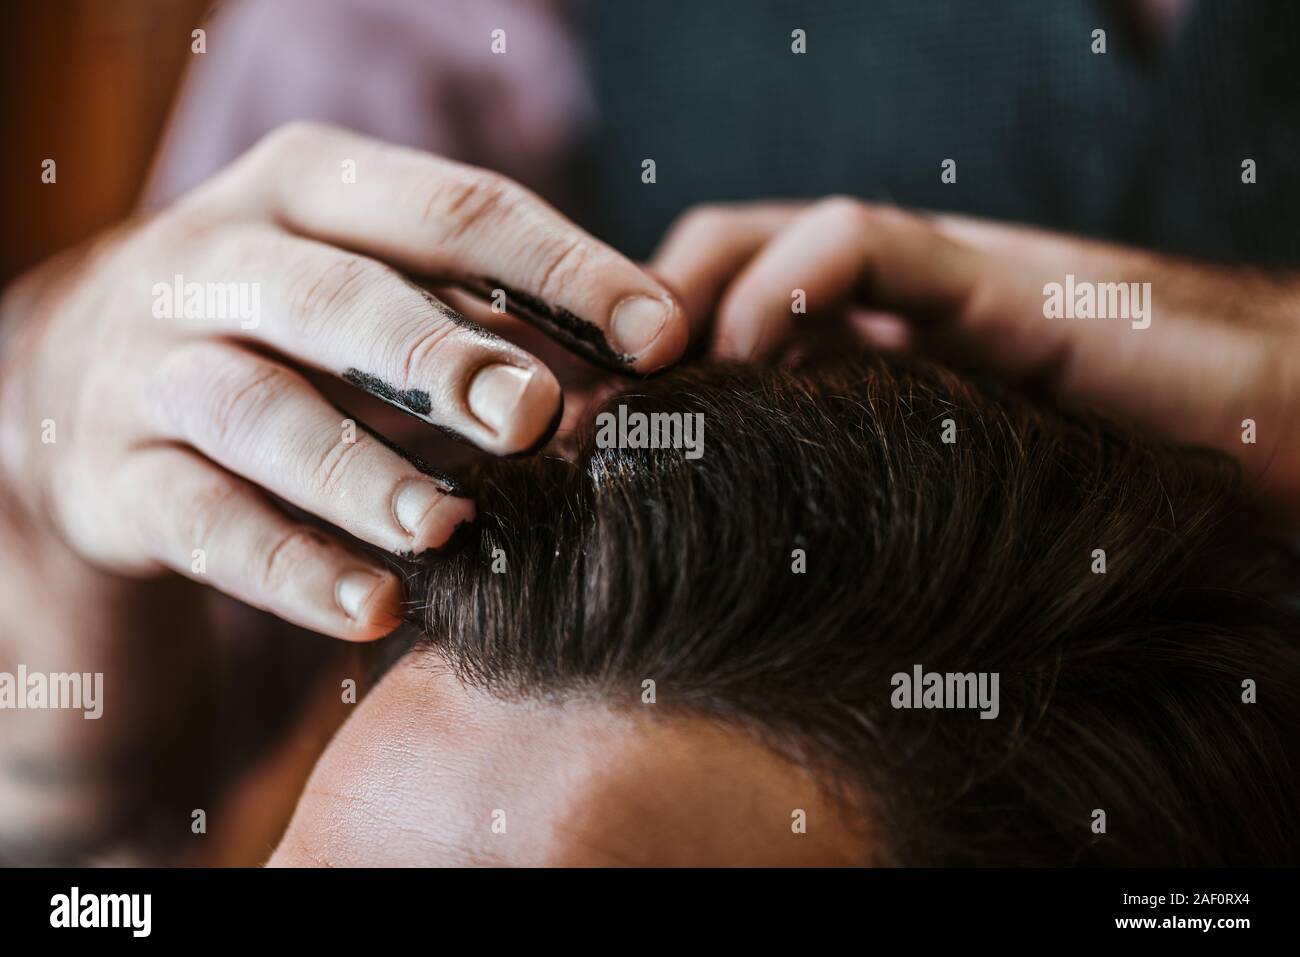 cropped view of barber with black hair pomade on hands styling hair of man Stock Photo